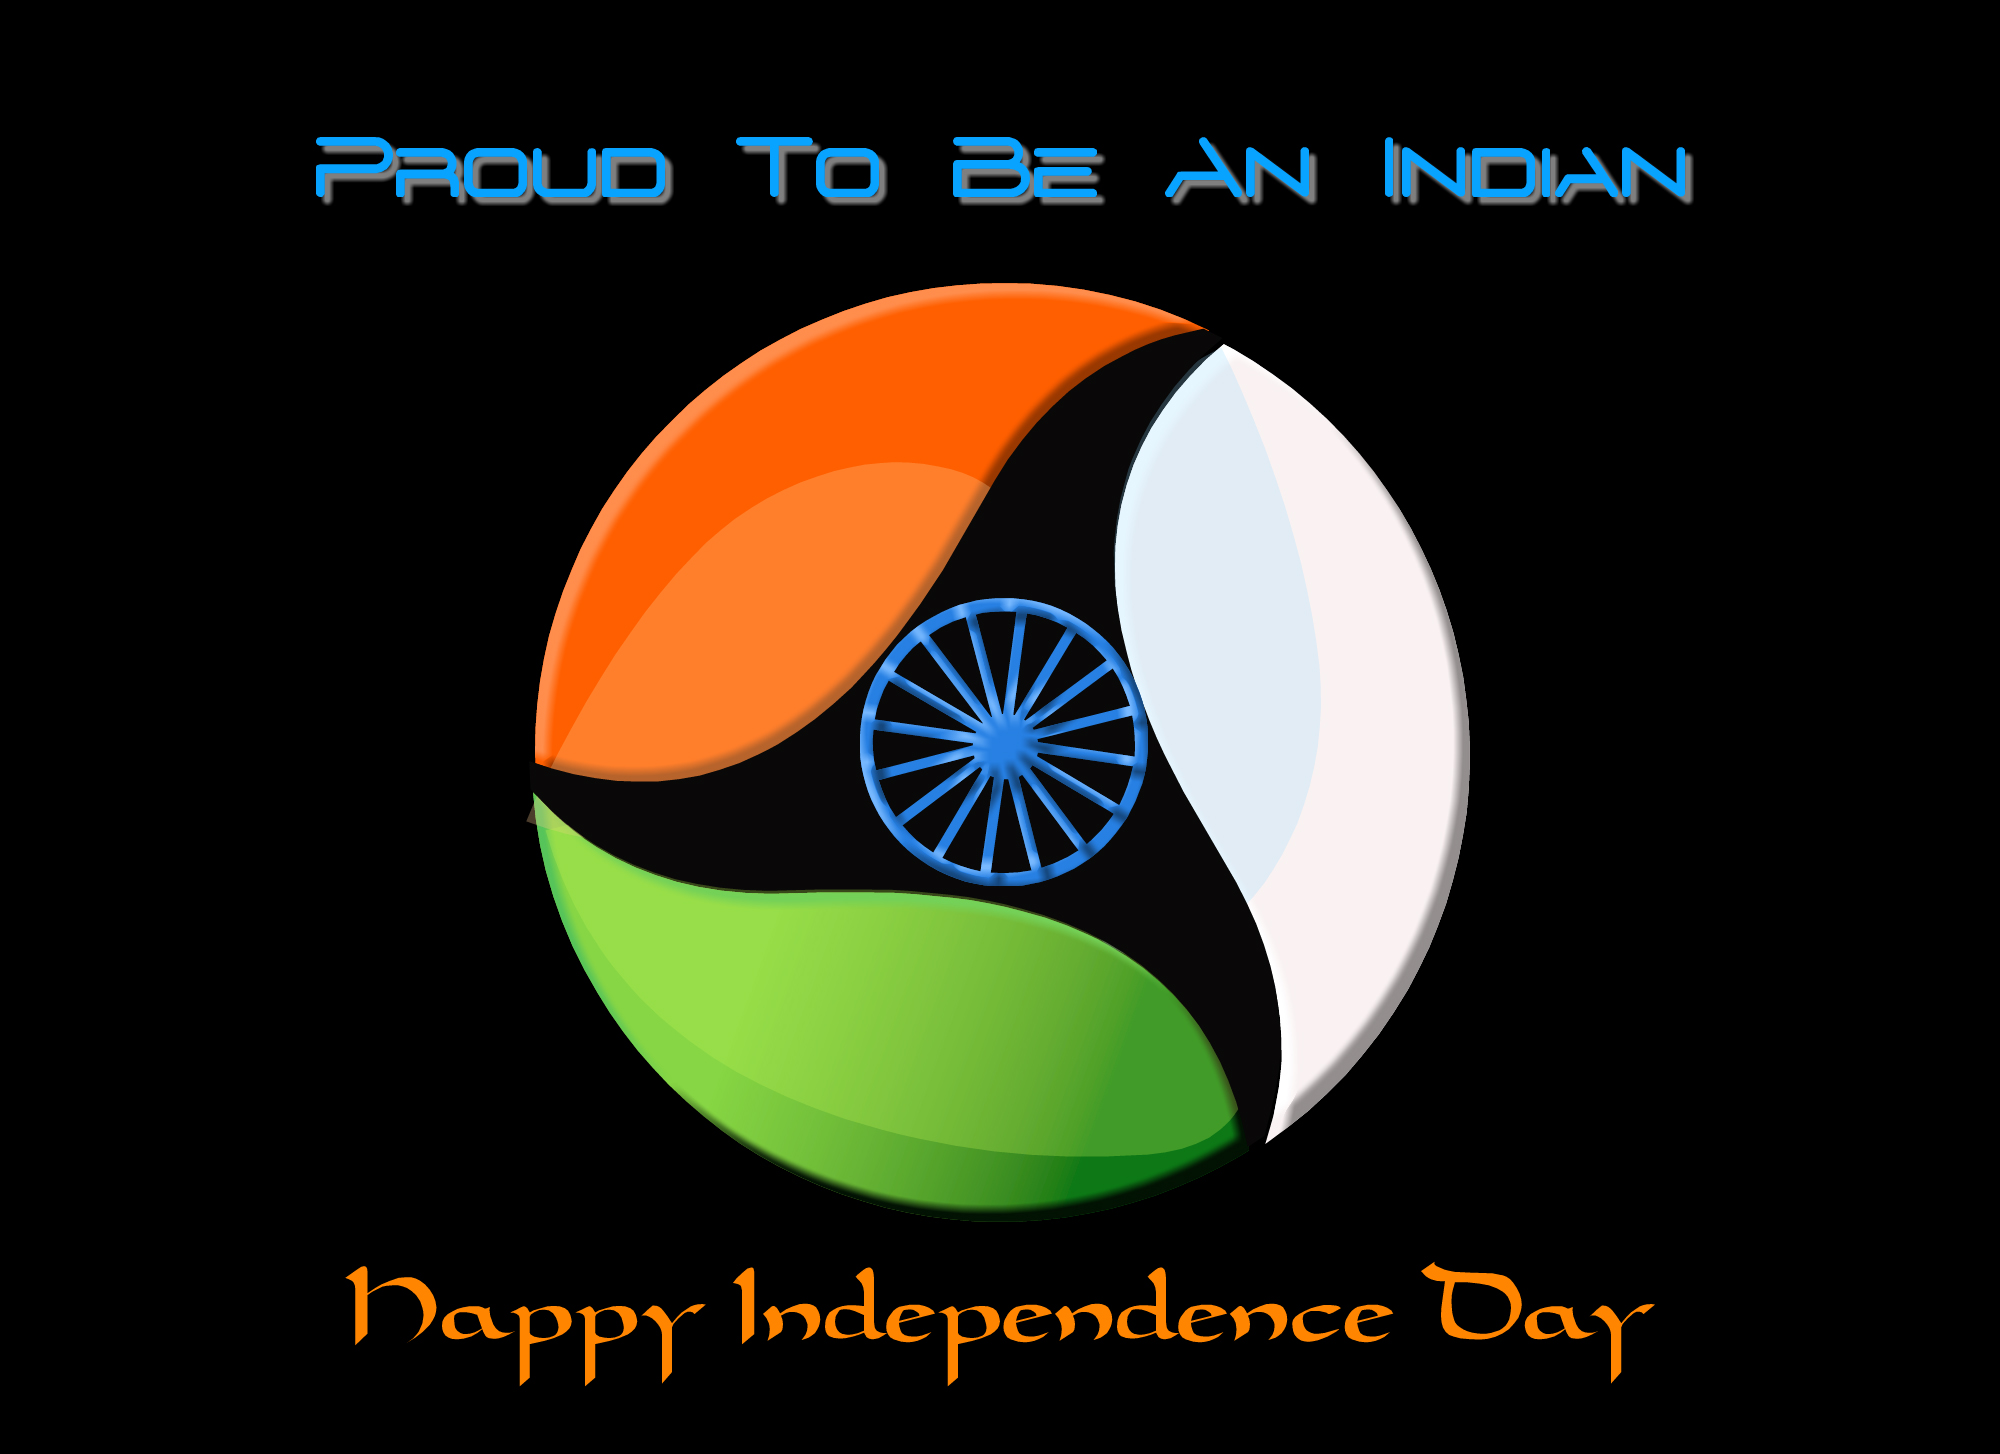 Happy Independence Day 2018 Image